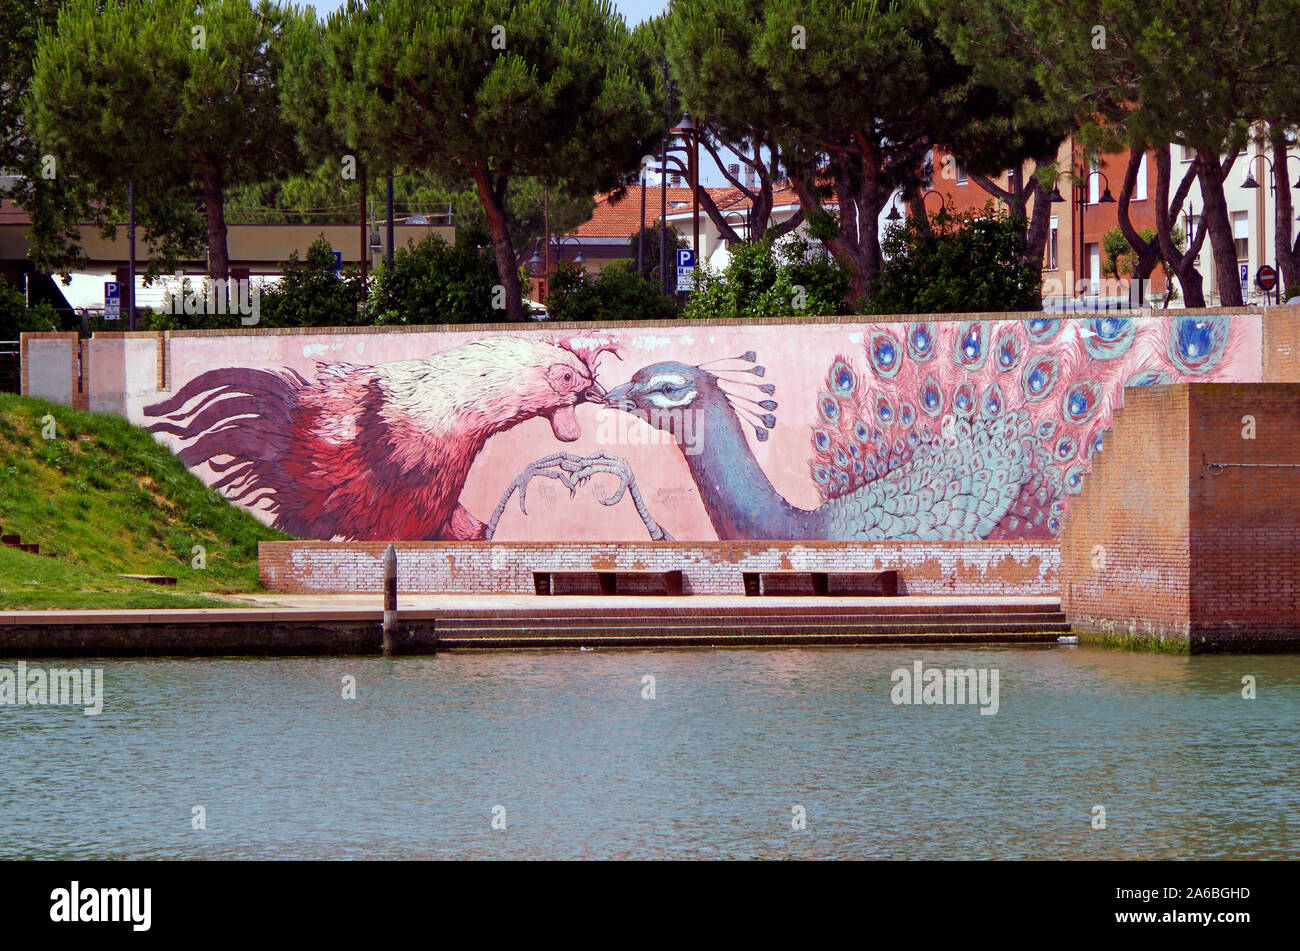 Large and elaborate mural, in Rimini, Italy, showing the heads of a cockerel and a peacock in profile confronting each other, beak to beak. Stock Photo